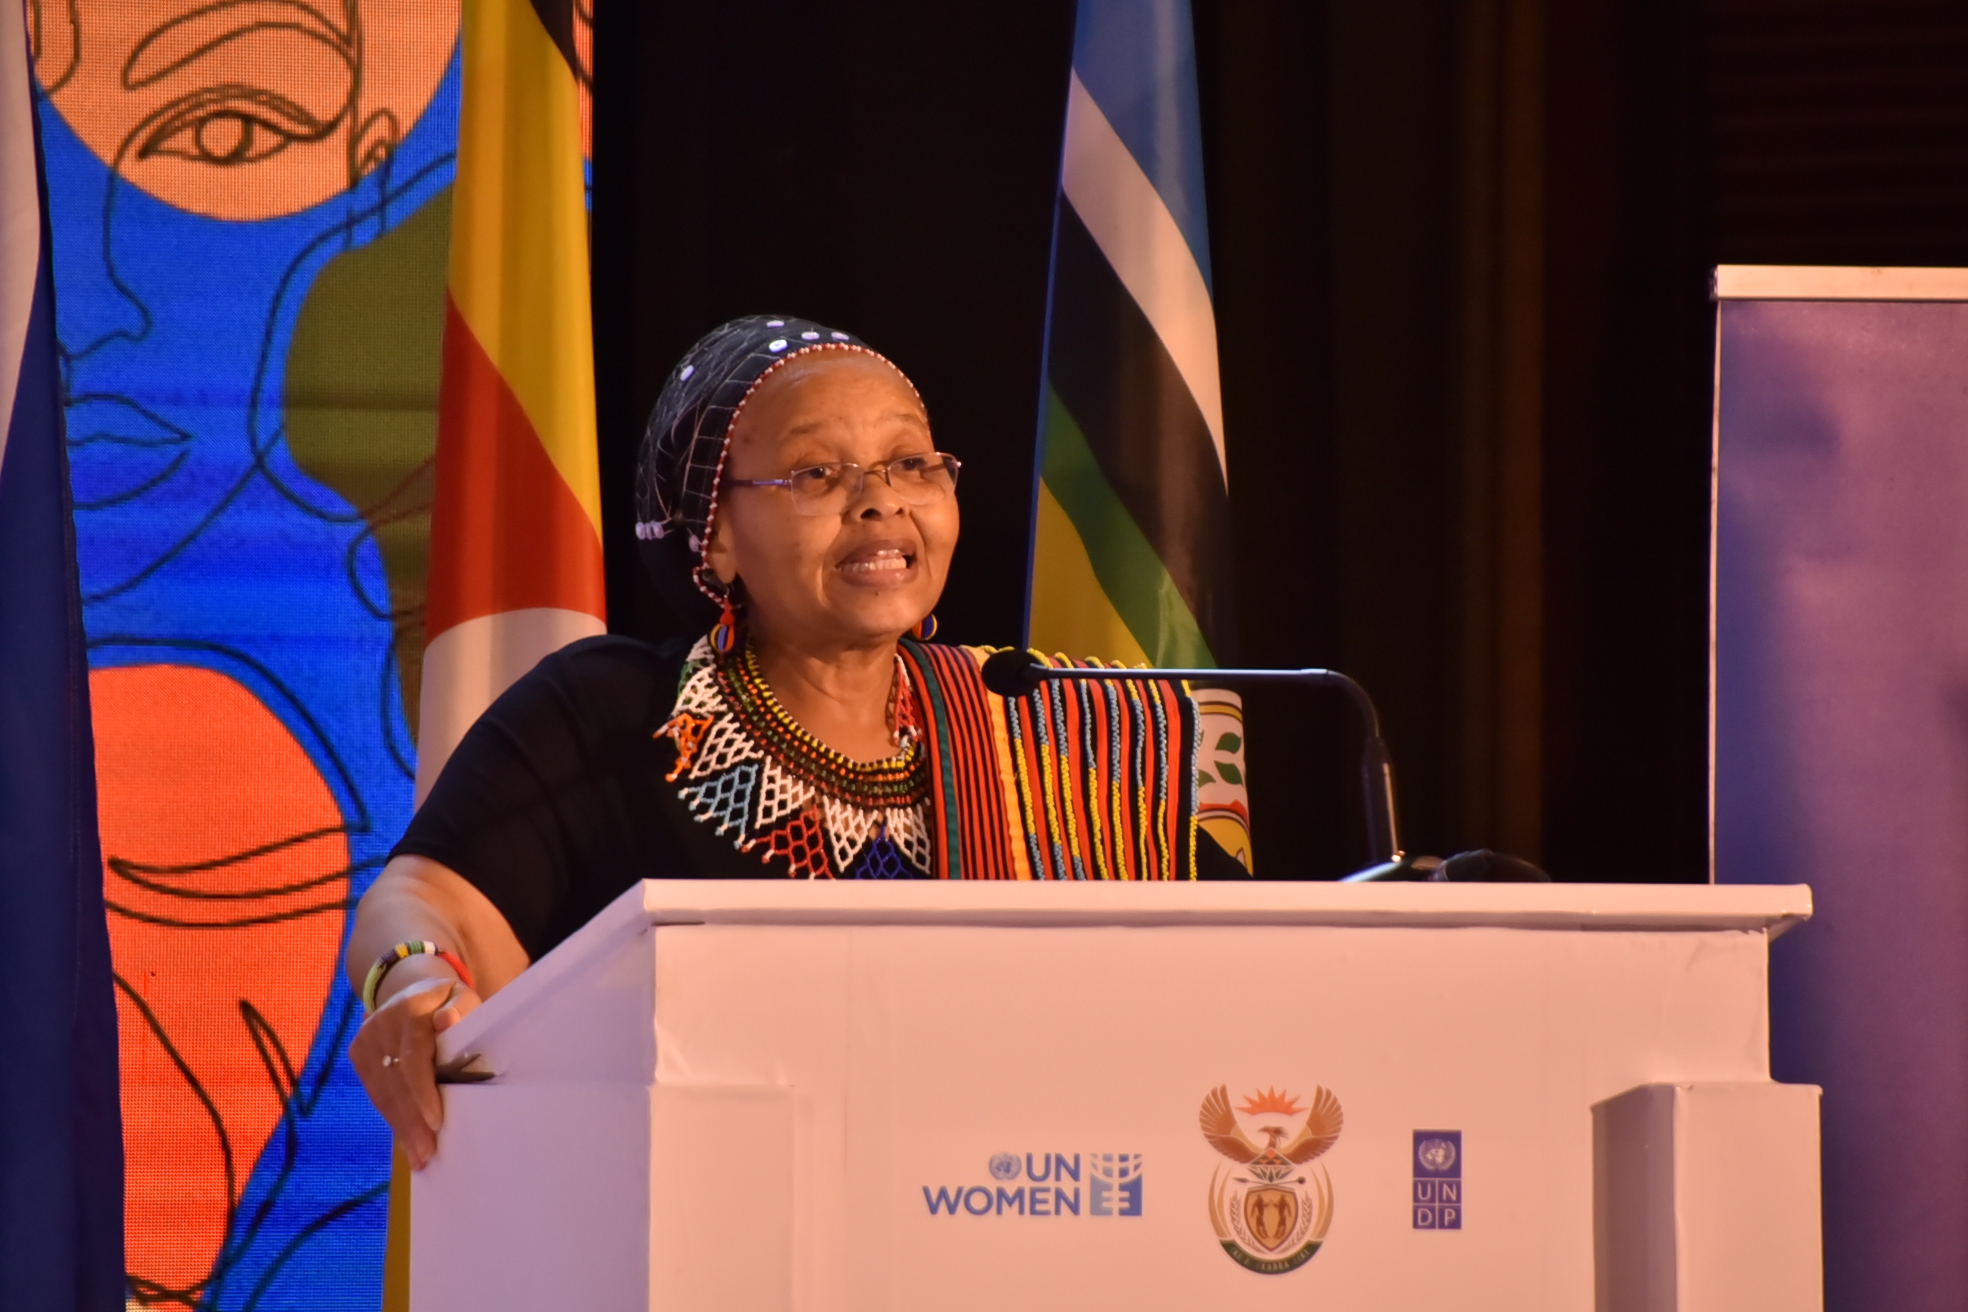 South African High Commissioner to Uganda H.E Lulama called on women and girls remember those who paved the way for women to be where they are today